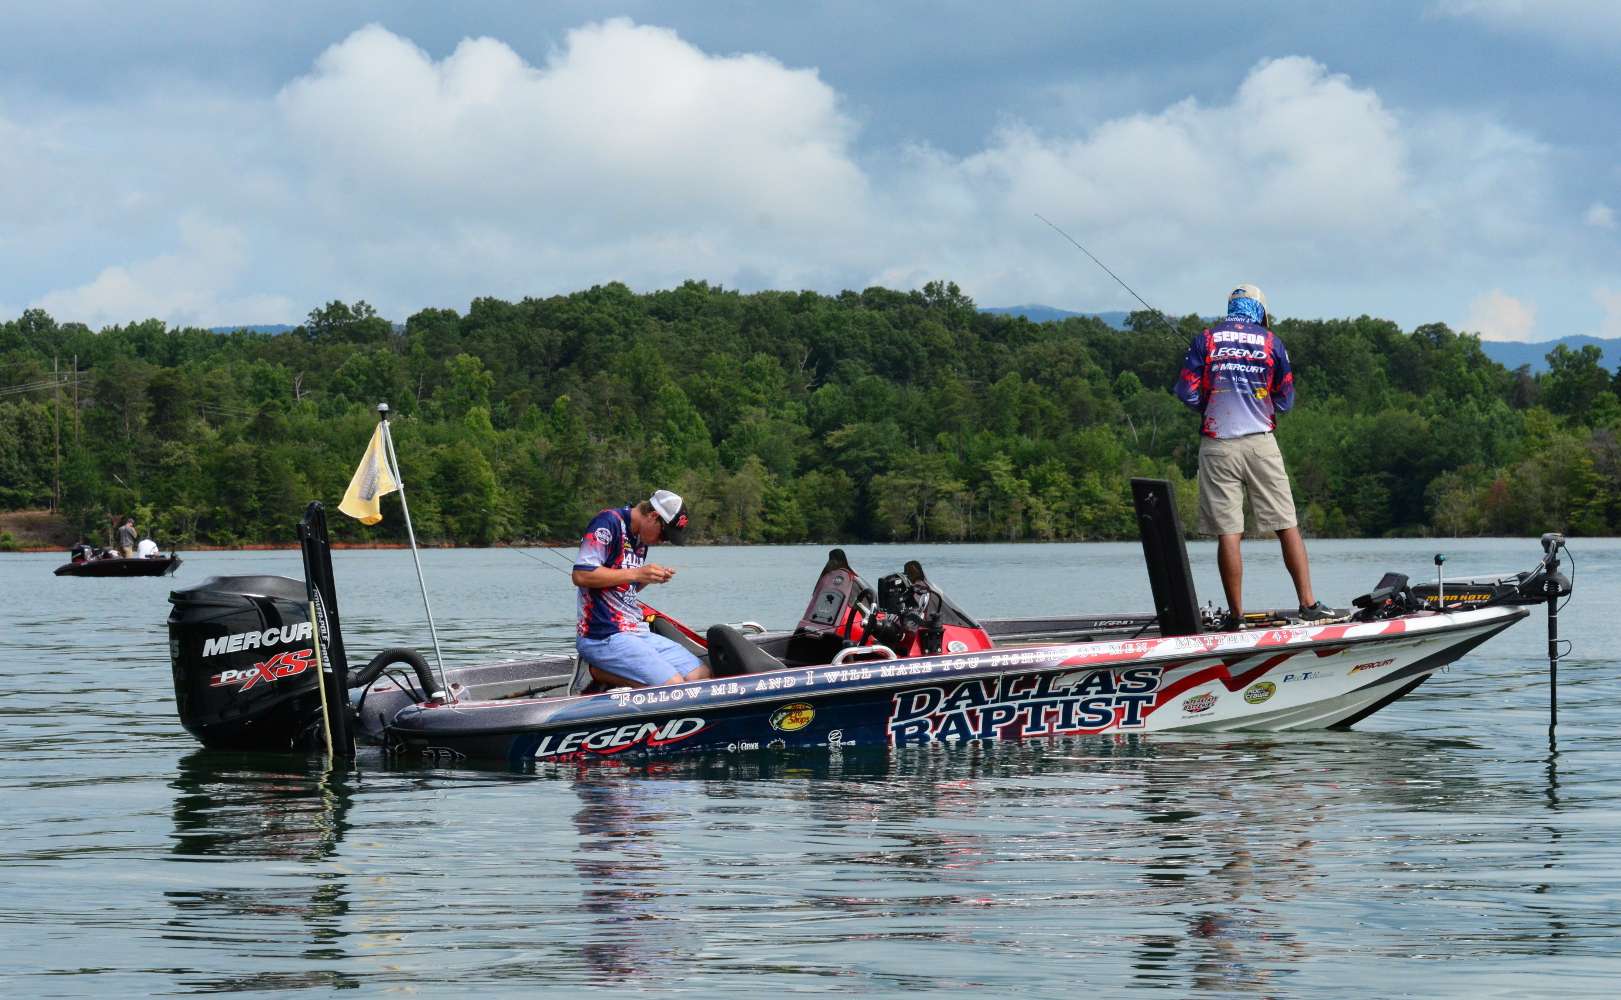 Newman gets ready to start fishing again. He and Sepeda brought in 3-2 yesterday and are mired in 59th place. They have a lot of work to do to get into the Top 5 cut from so far back.
